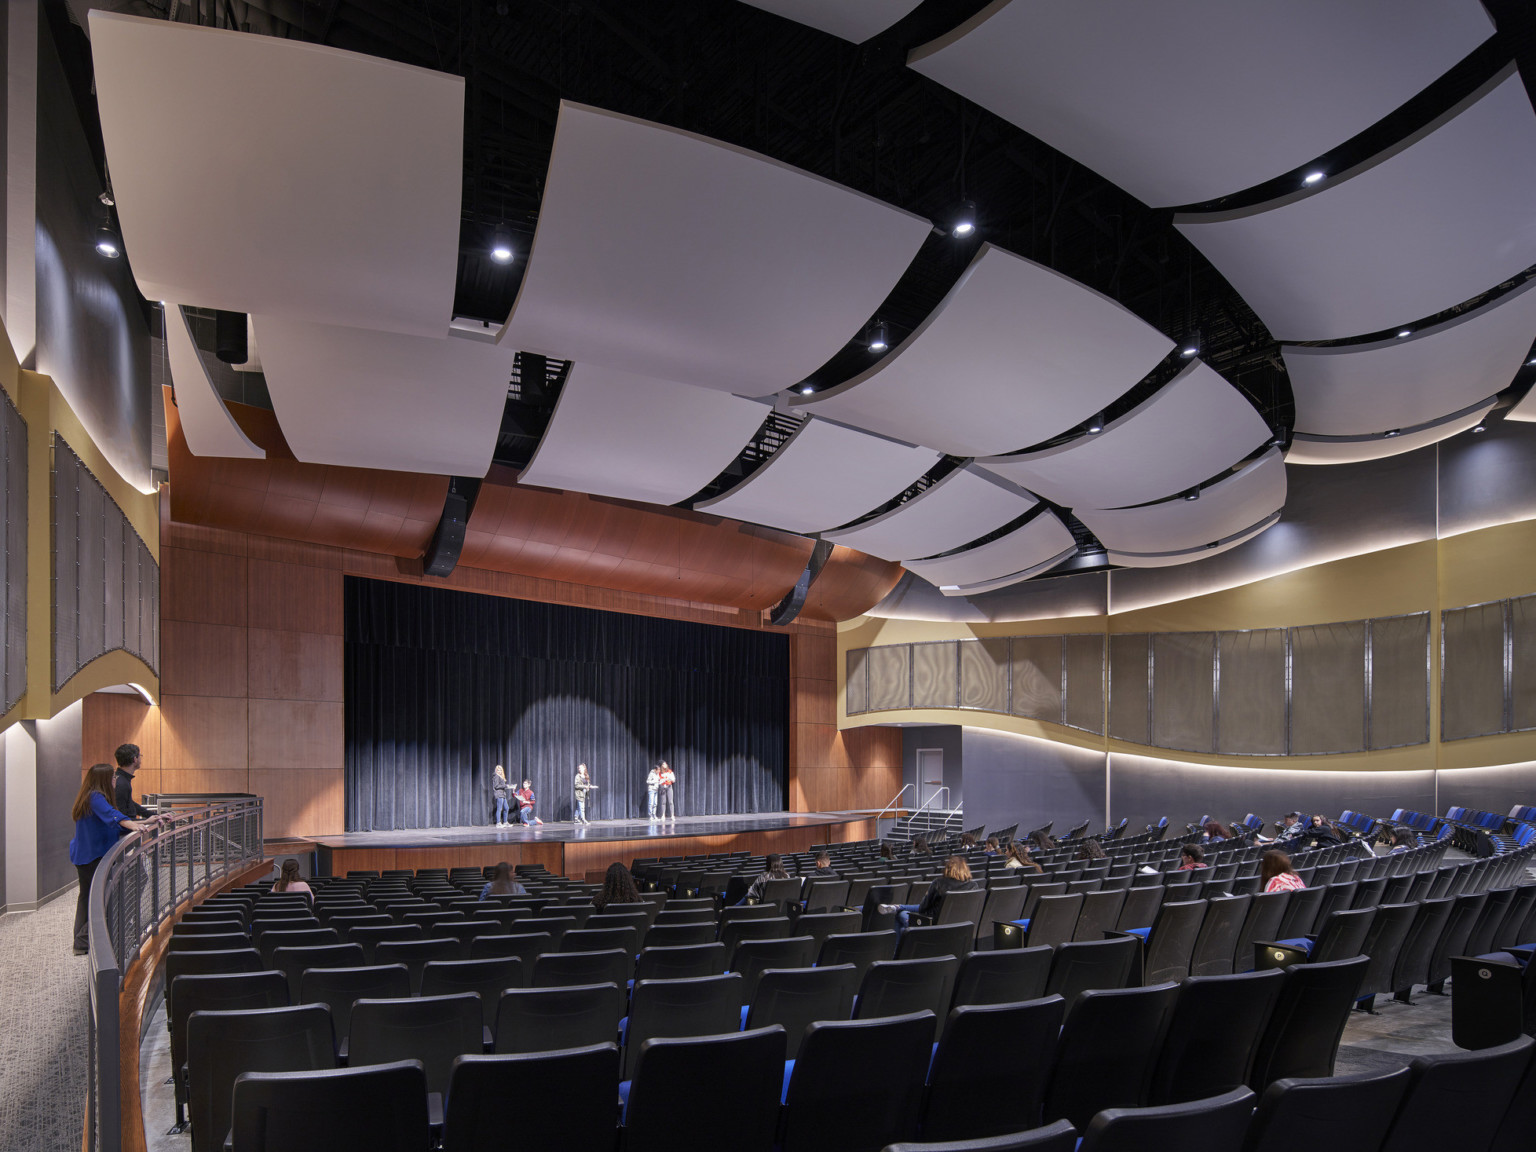 View of theater from back, facing stage with rounded wood framing. Rows of acoustical panels above and along wood side walls